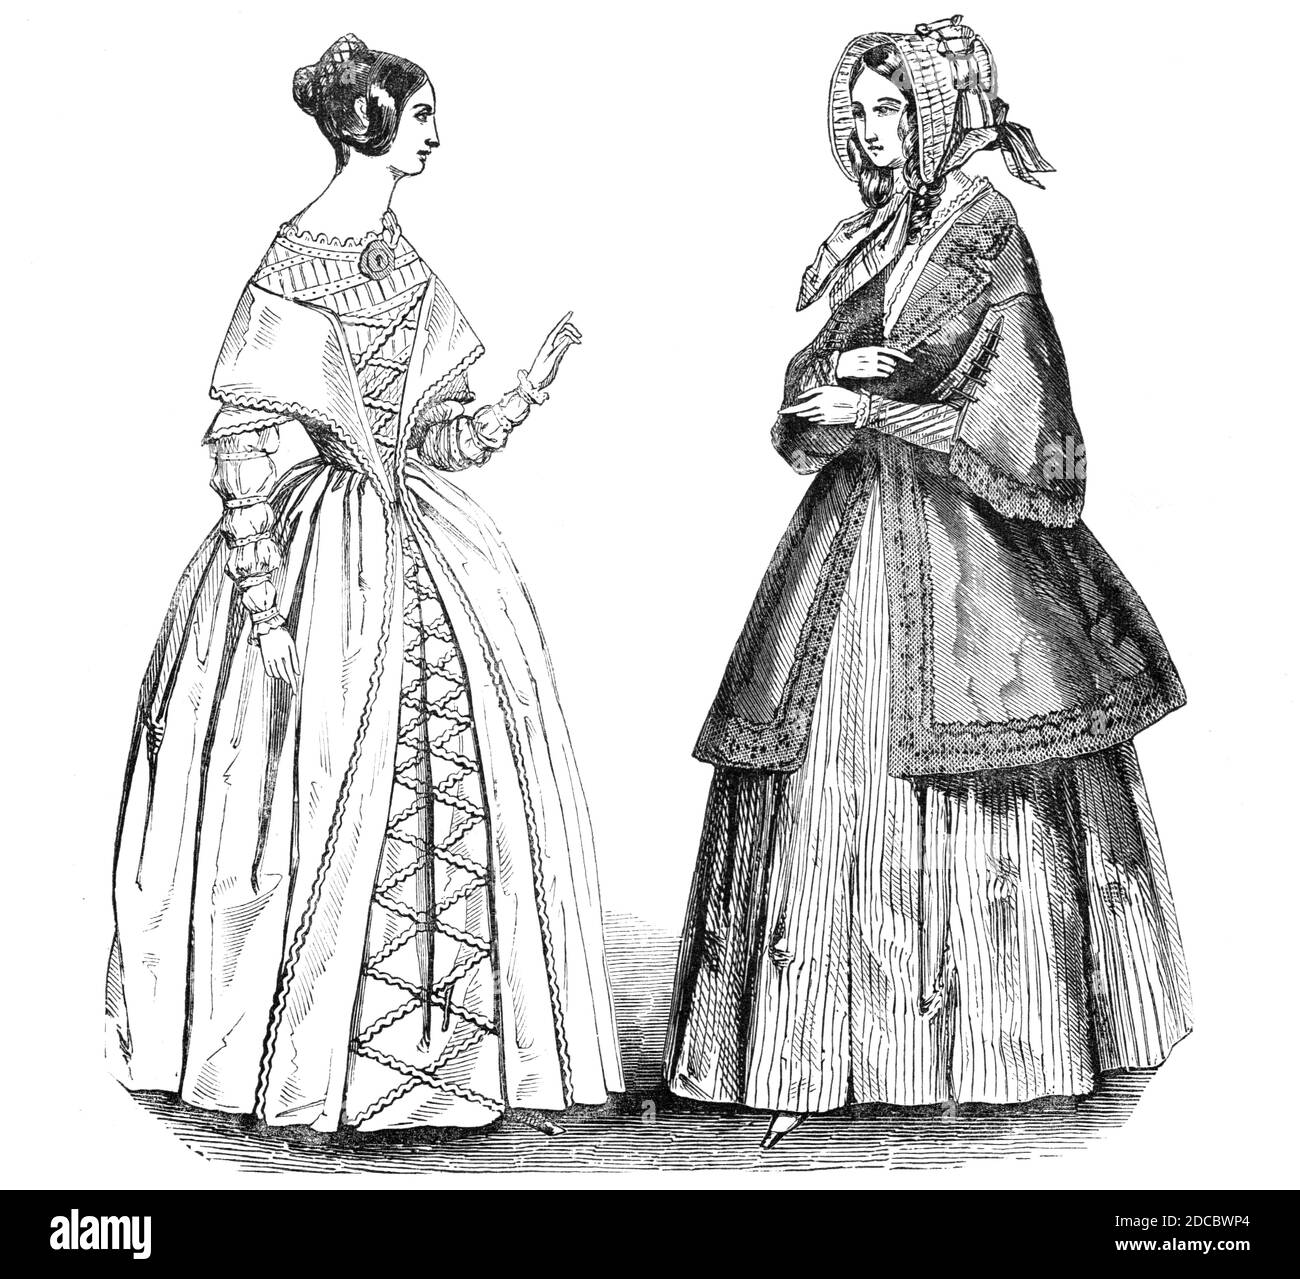 Fashions for May, 1844. 'No. 1. A Grecian hair coiffure. A Camelion silk dress, laced down the front with silk gimp cord, chemisette and sleeves of muslin, with embroidered bands. No. 2. A drawn silk capote. A cachemire cloak trimmed with black lace'. From &quot;Illustrated London News&quot;, 1844, Vol I. Stock Photo